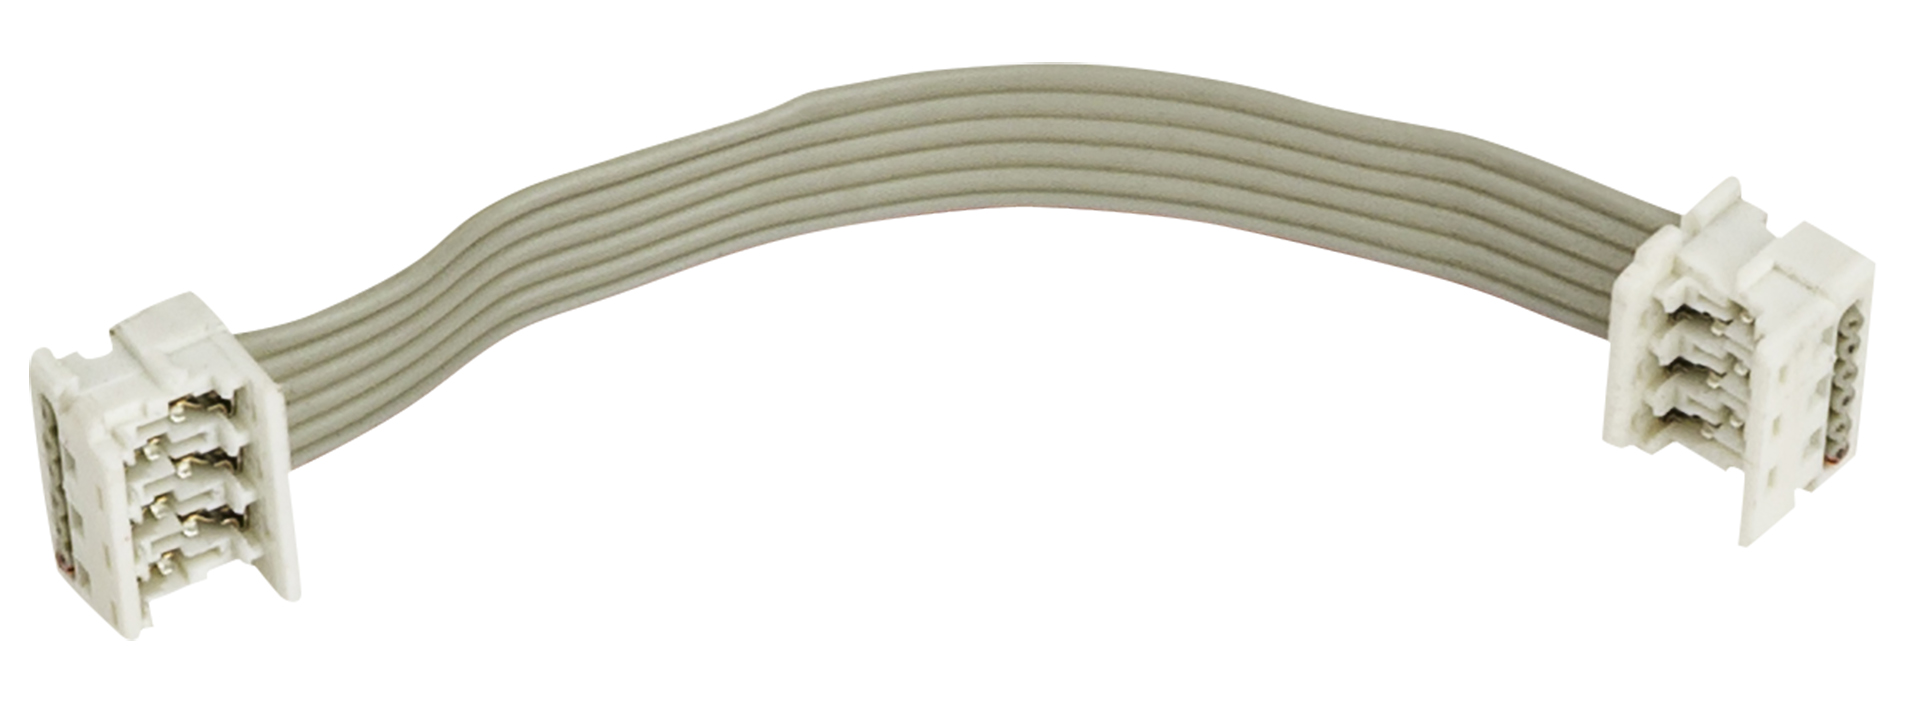 Warwick Parts - Flatcable for Warwick Electronics, 70 mm